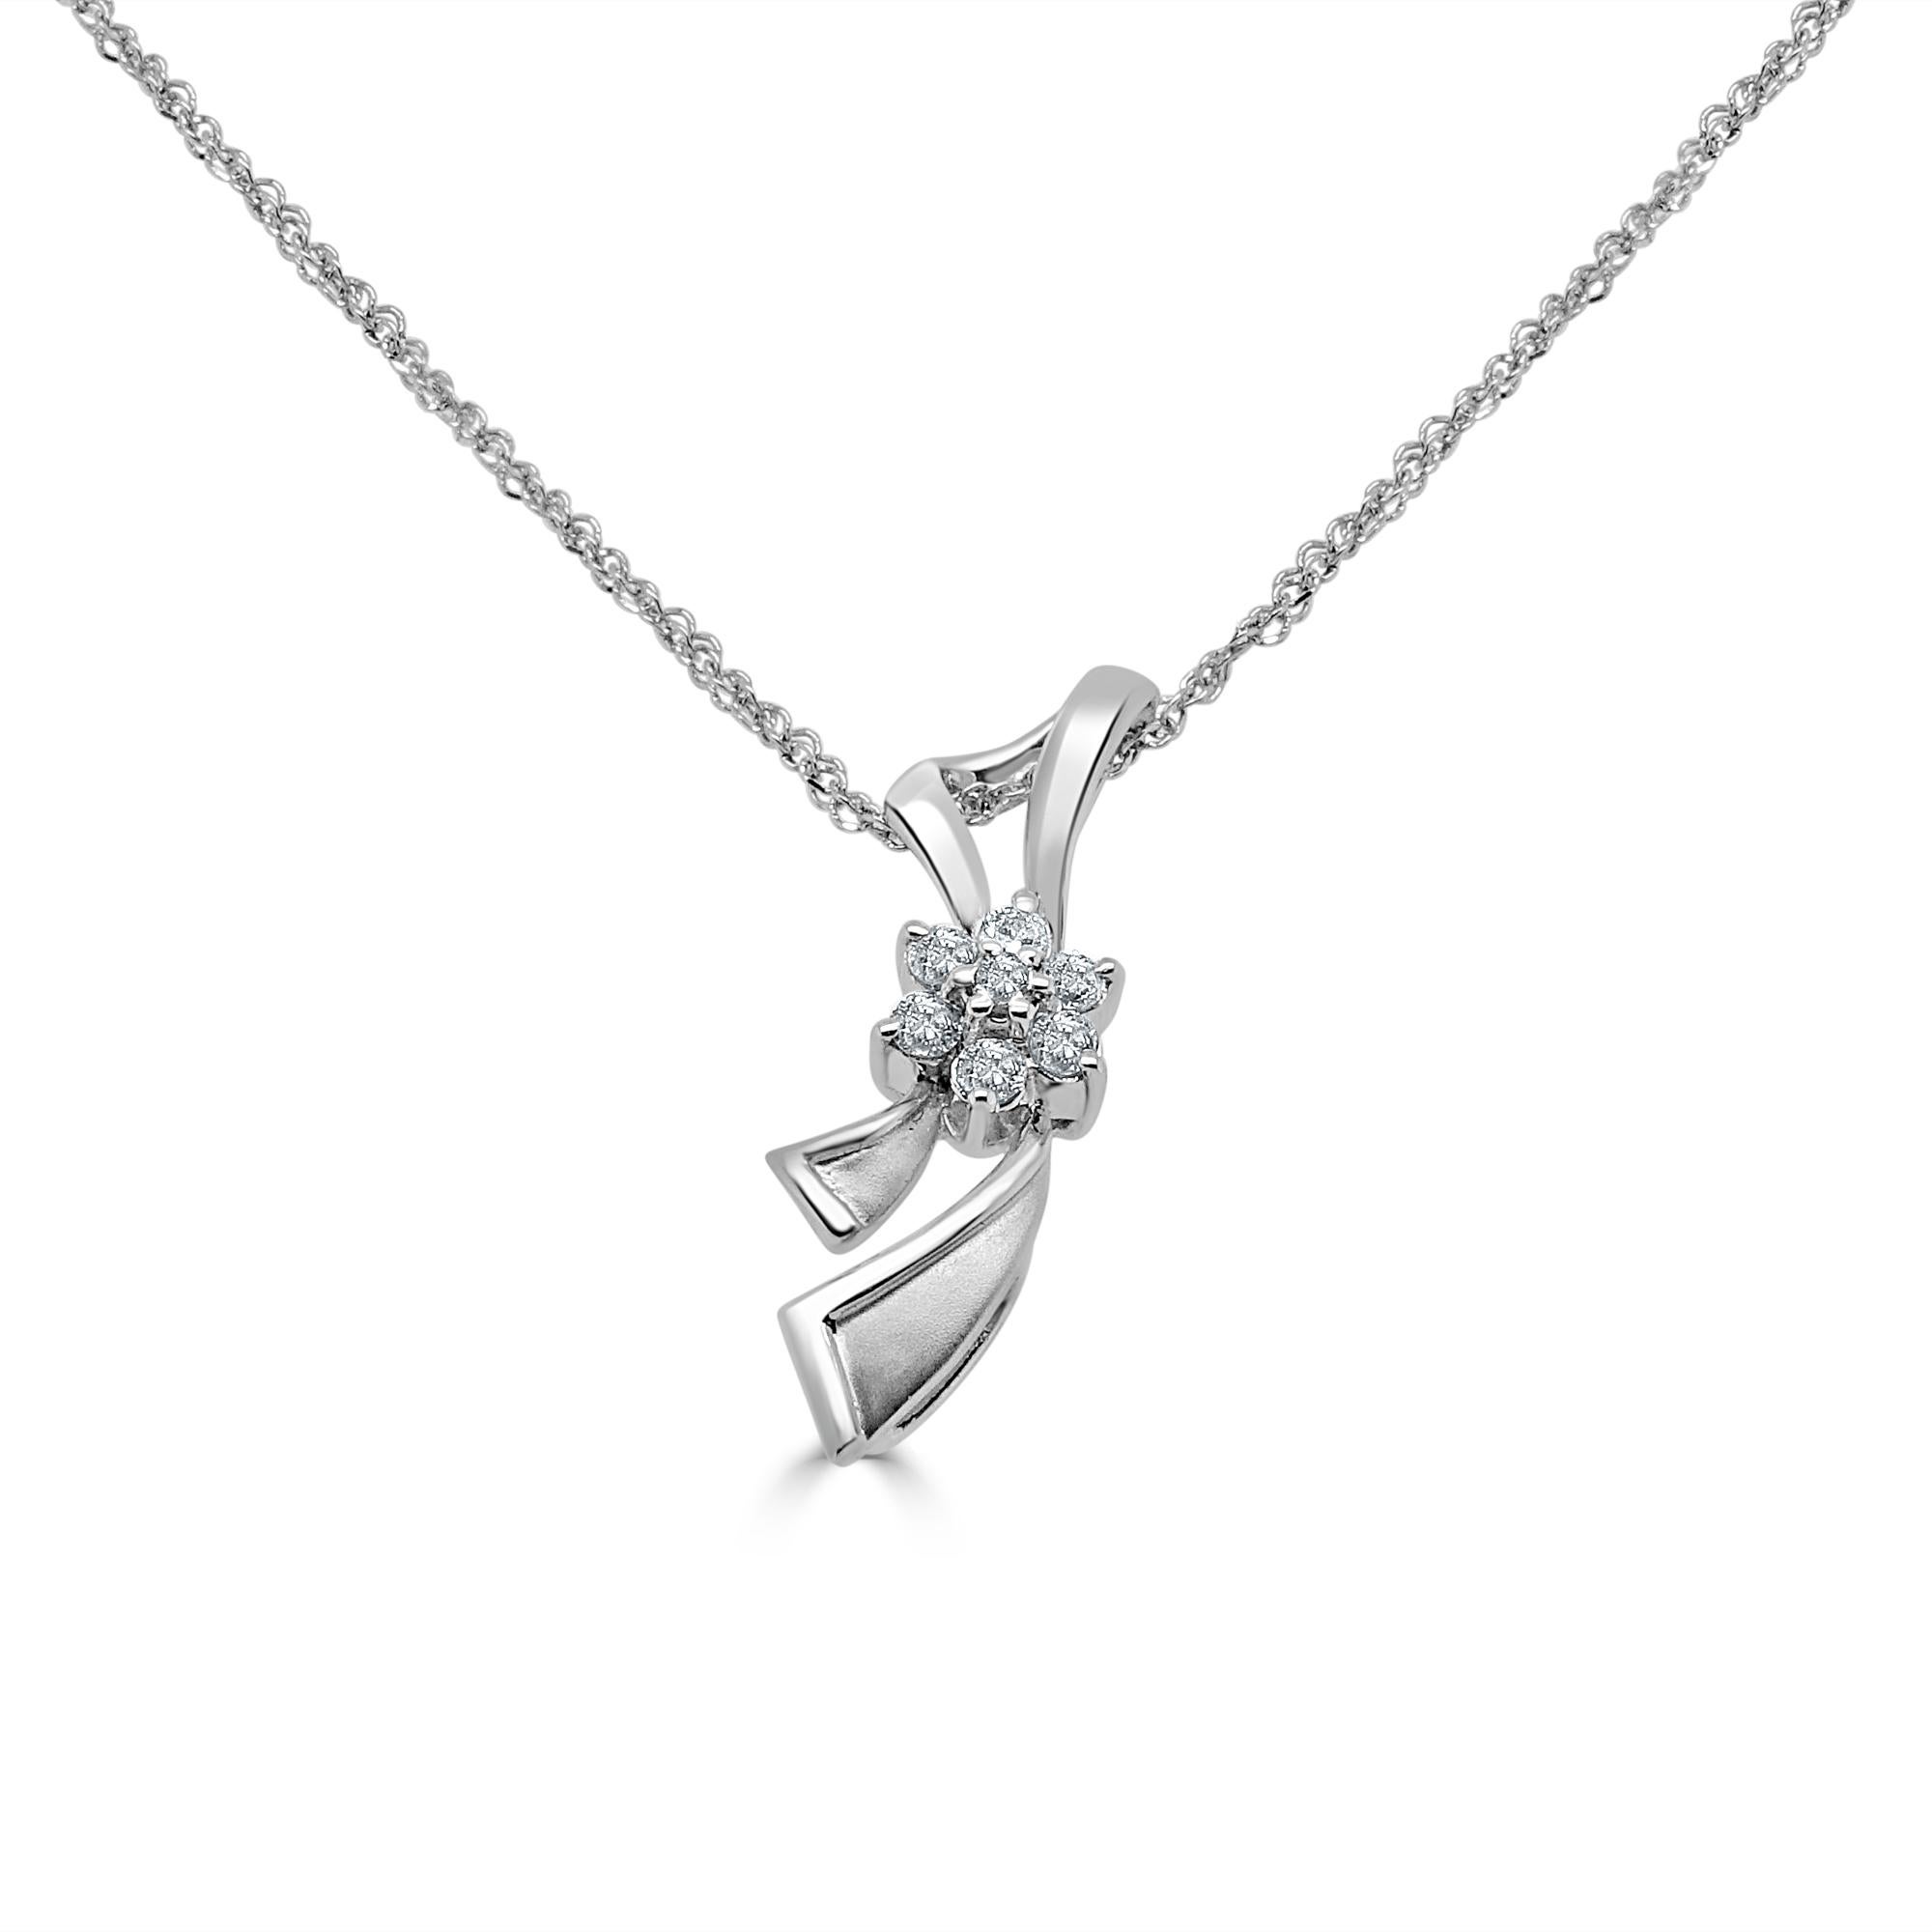 18 Karat White Gold 0.14 Carat Diamond Chain Necklace Wedding Fine Jewelry 

Gentle and elegant pendant is crafted in a sleek white gold. Featuring round cut diamonds, together totaling 0.14 TCW . Suspended from a 16-inch stunning non-tangle, non